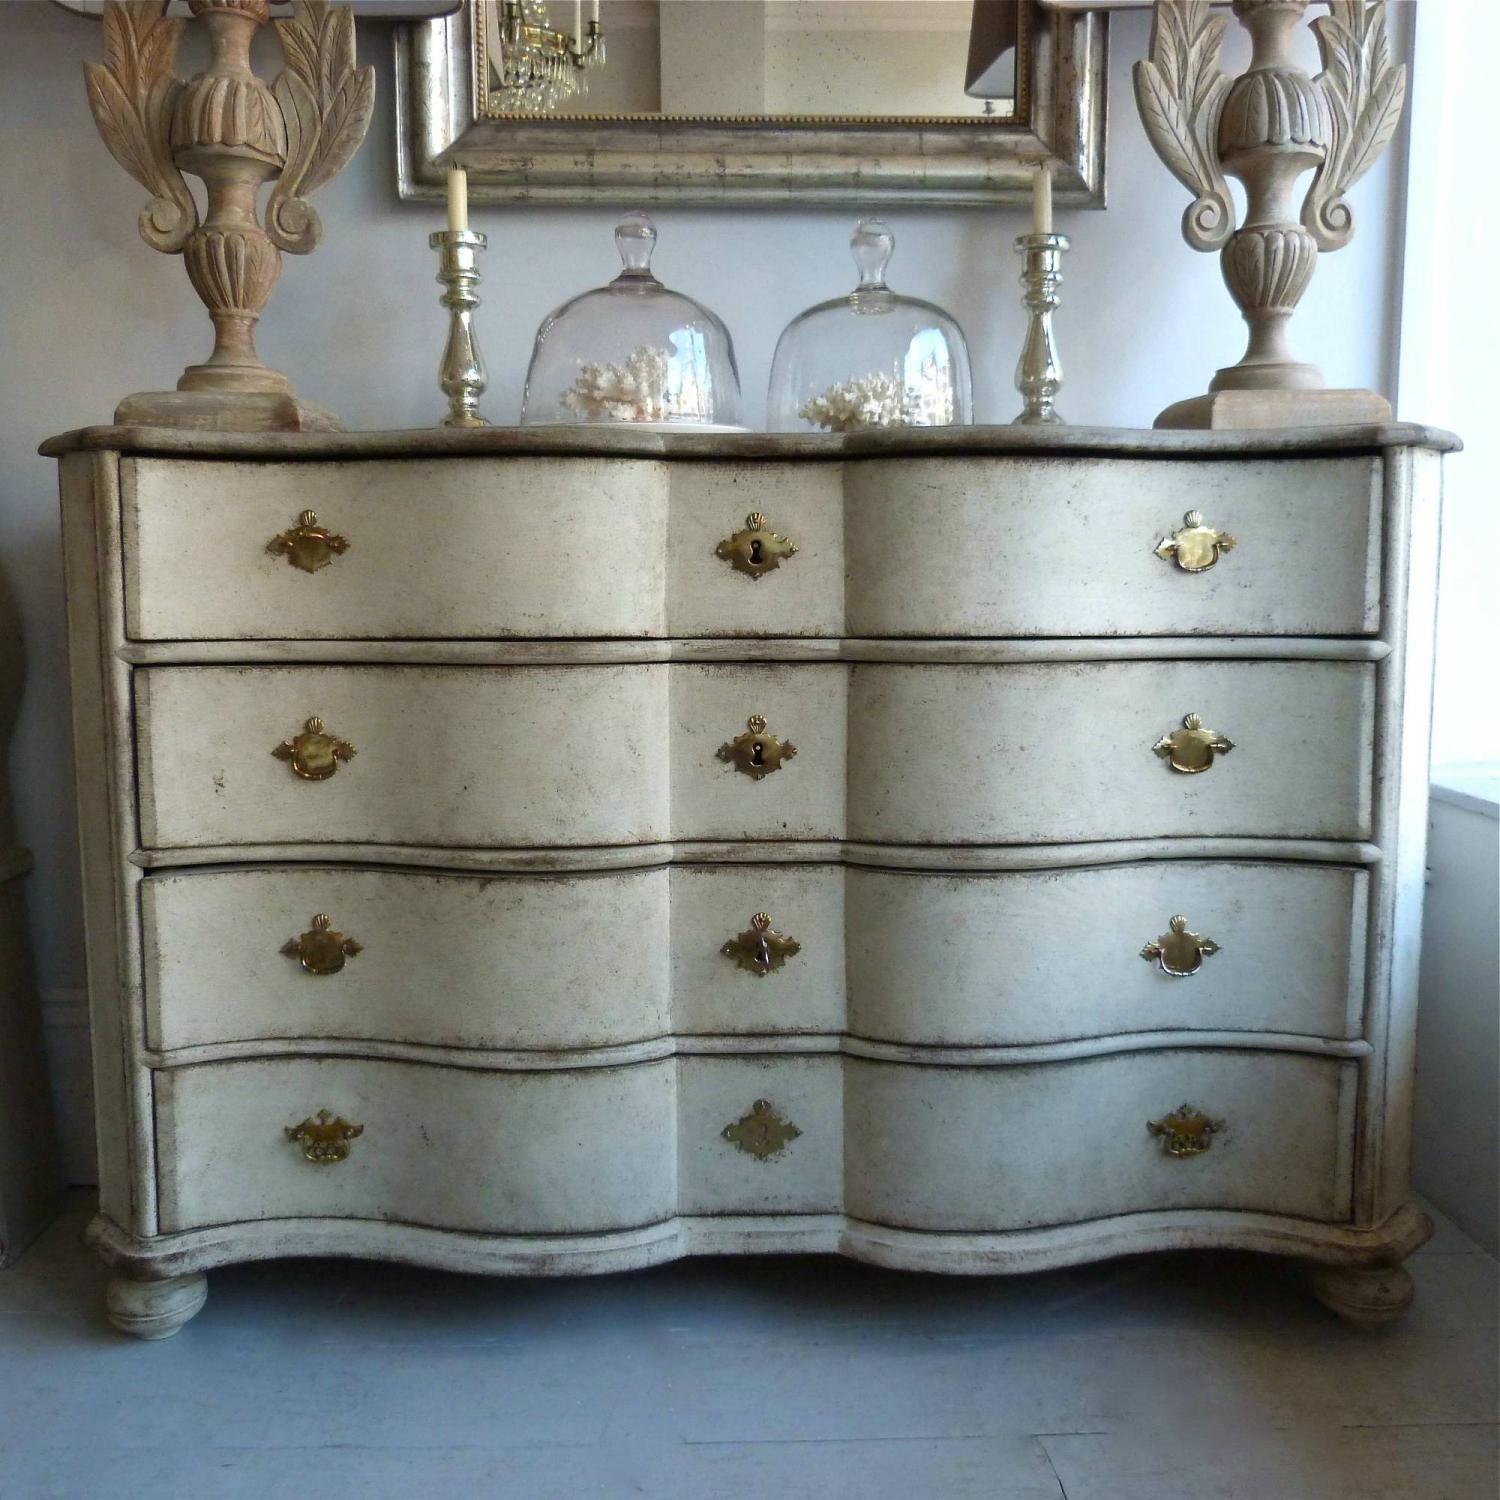 EXCEPTIONAL SCANDANAVIAN ROCOCO CHEST OF DRAWERS